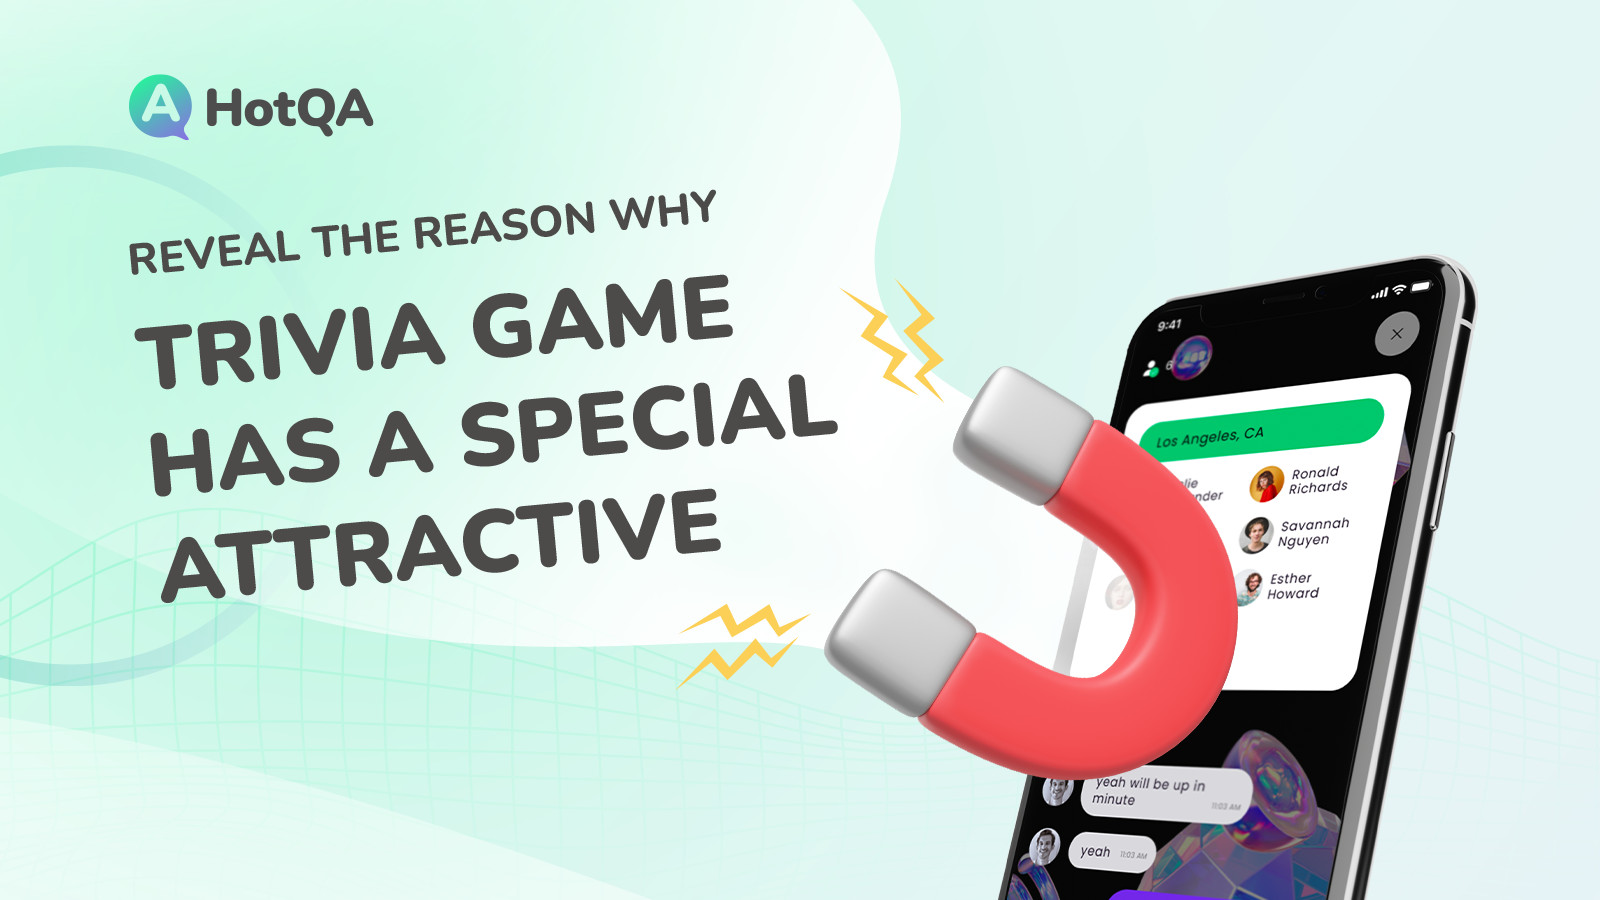 Reveal The Reason Why Trivia Game Has A Special Attractive